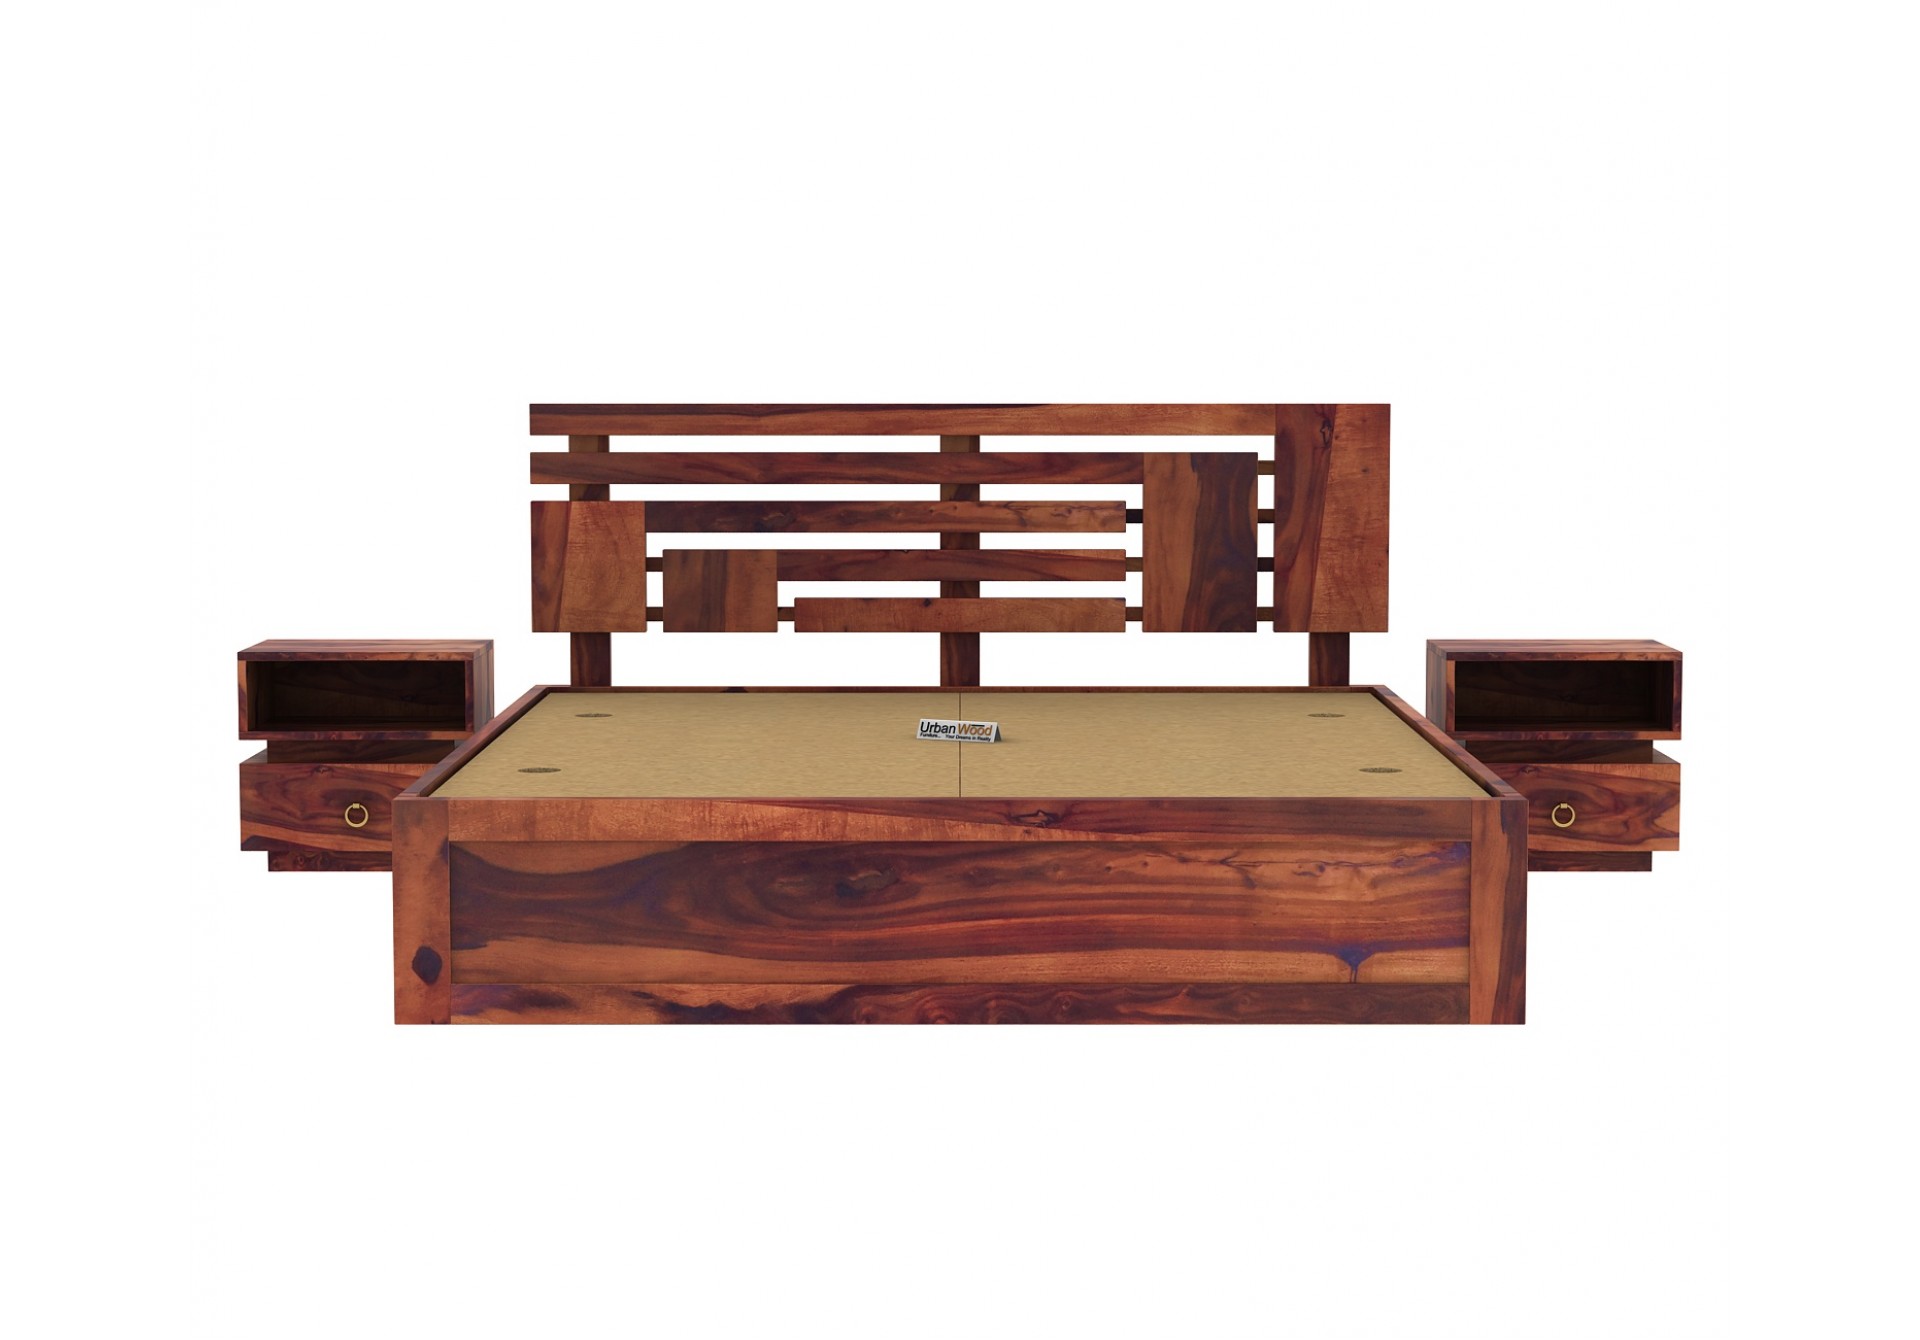 Berlin Wooden Bed With Box Storage (King Size, Teak Finish)